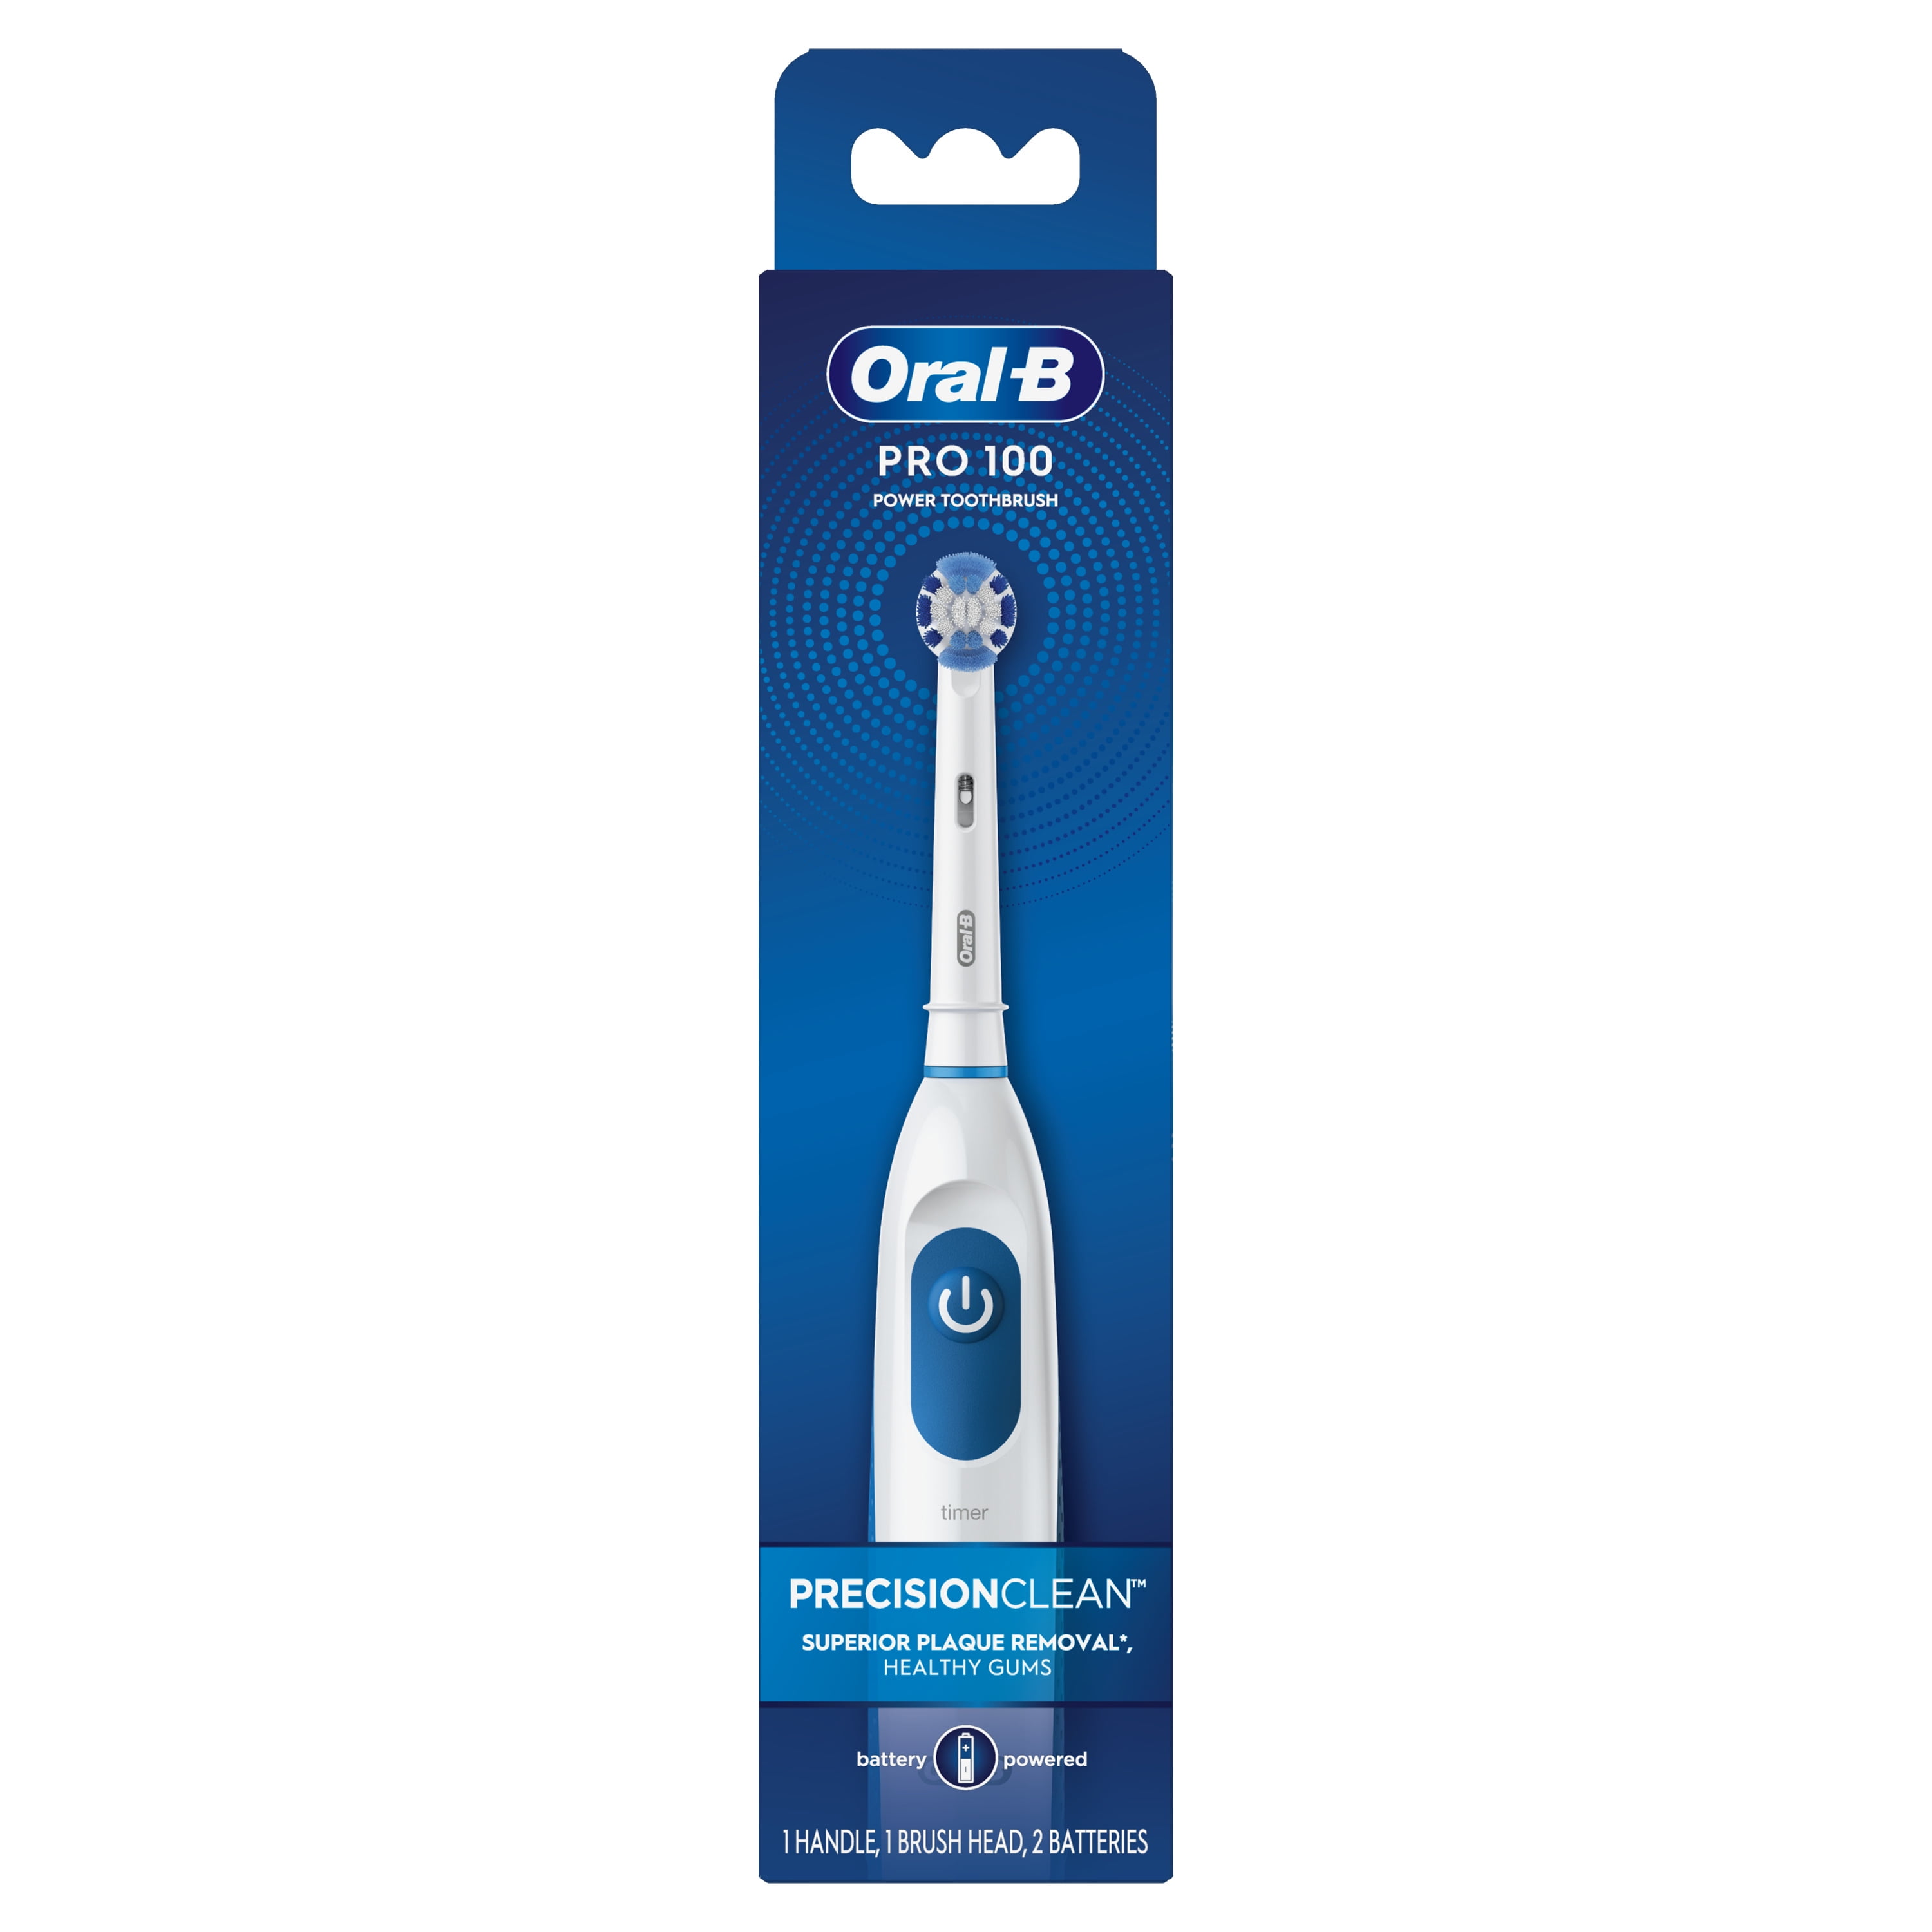 Retaliation shear gown Oral-B Pro Health Clinical Battery Electric Toothbrush, 1 Ct - Walmart.com